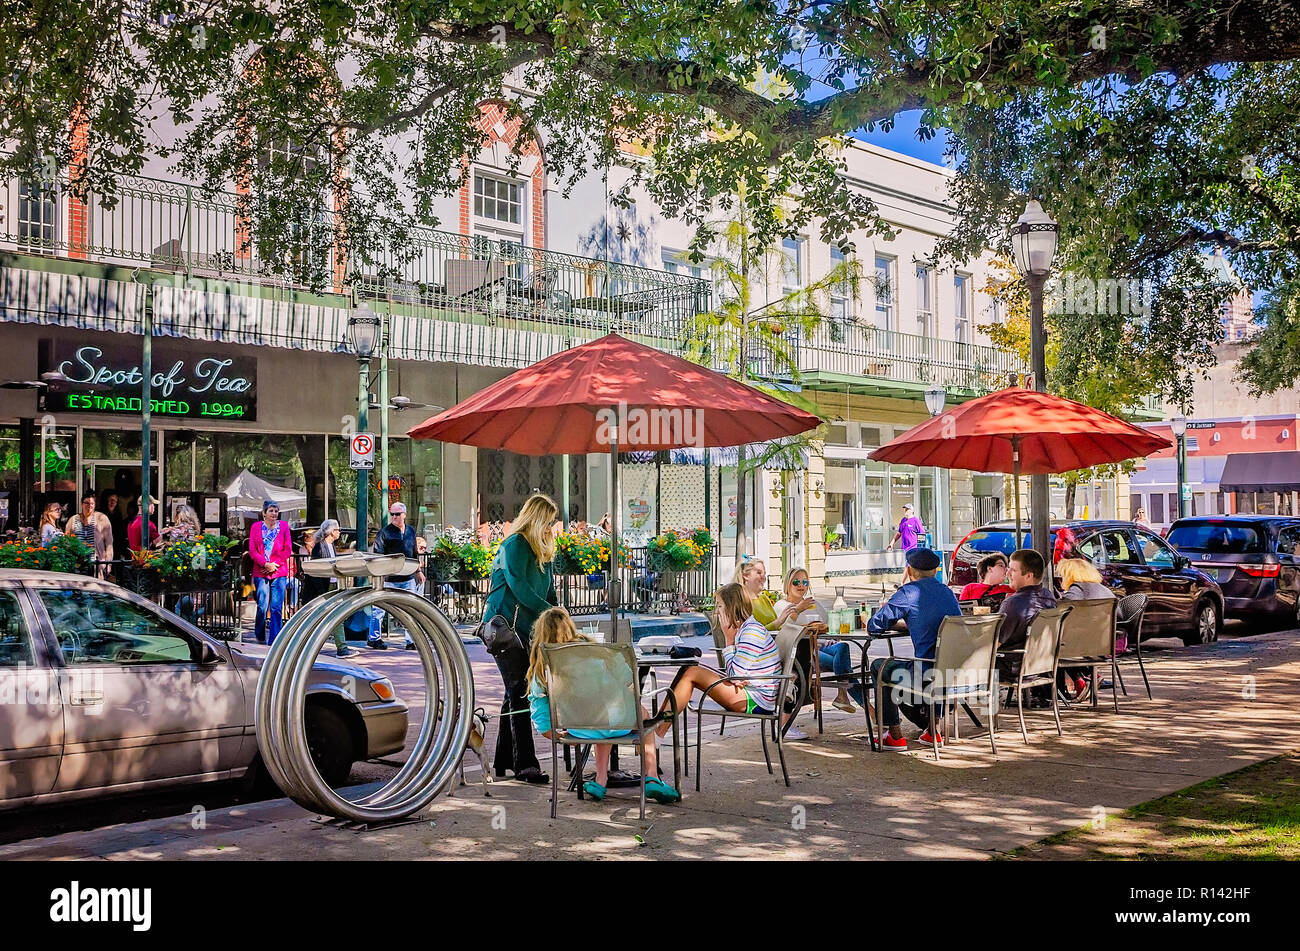 Diners hang out on Dauphin Street across from Spot of Tea, Nov. 3, 2018, in Mobile, Alabama. Stock Photo